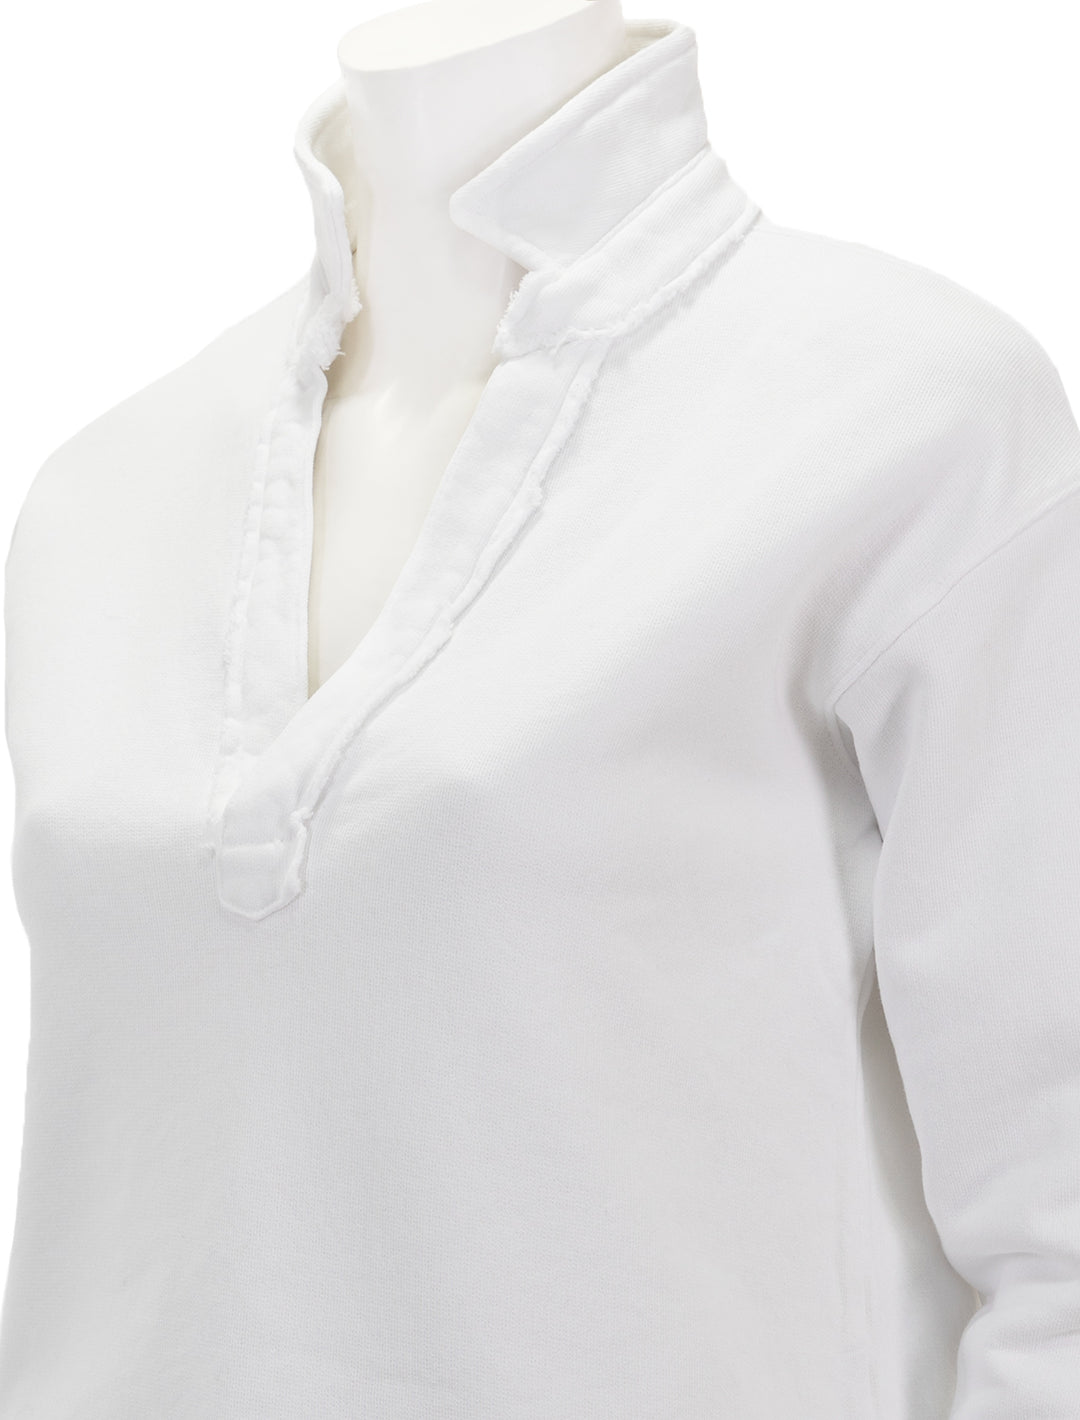 Close-up view of Frank & Eileen's patrick popover henley in white.